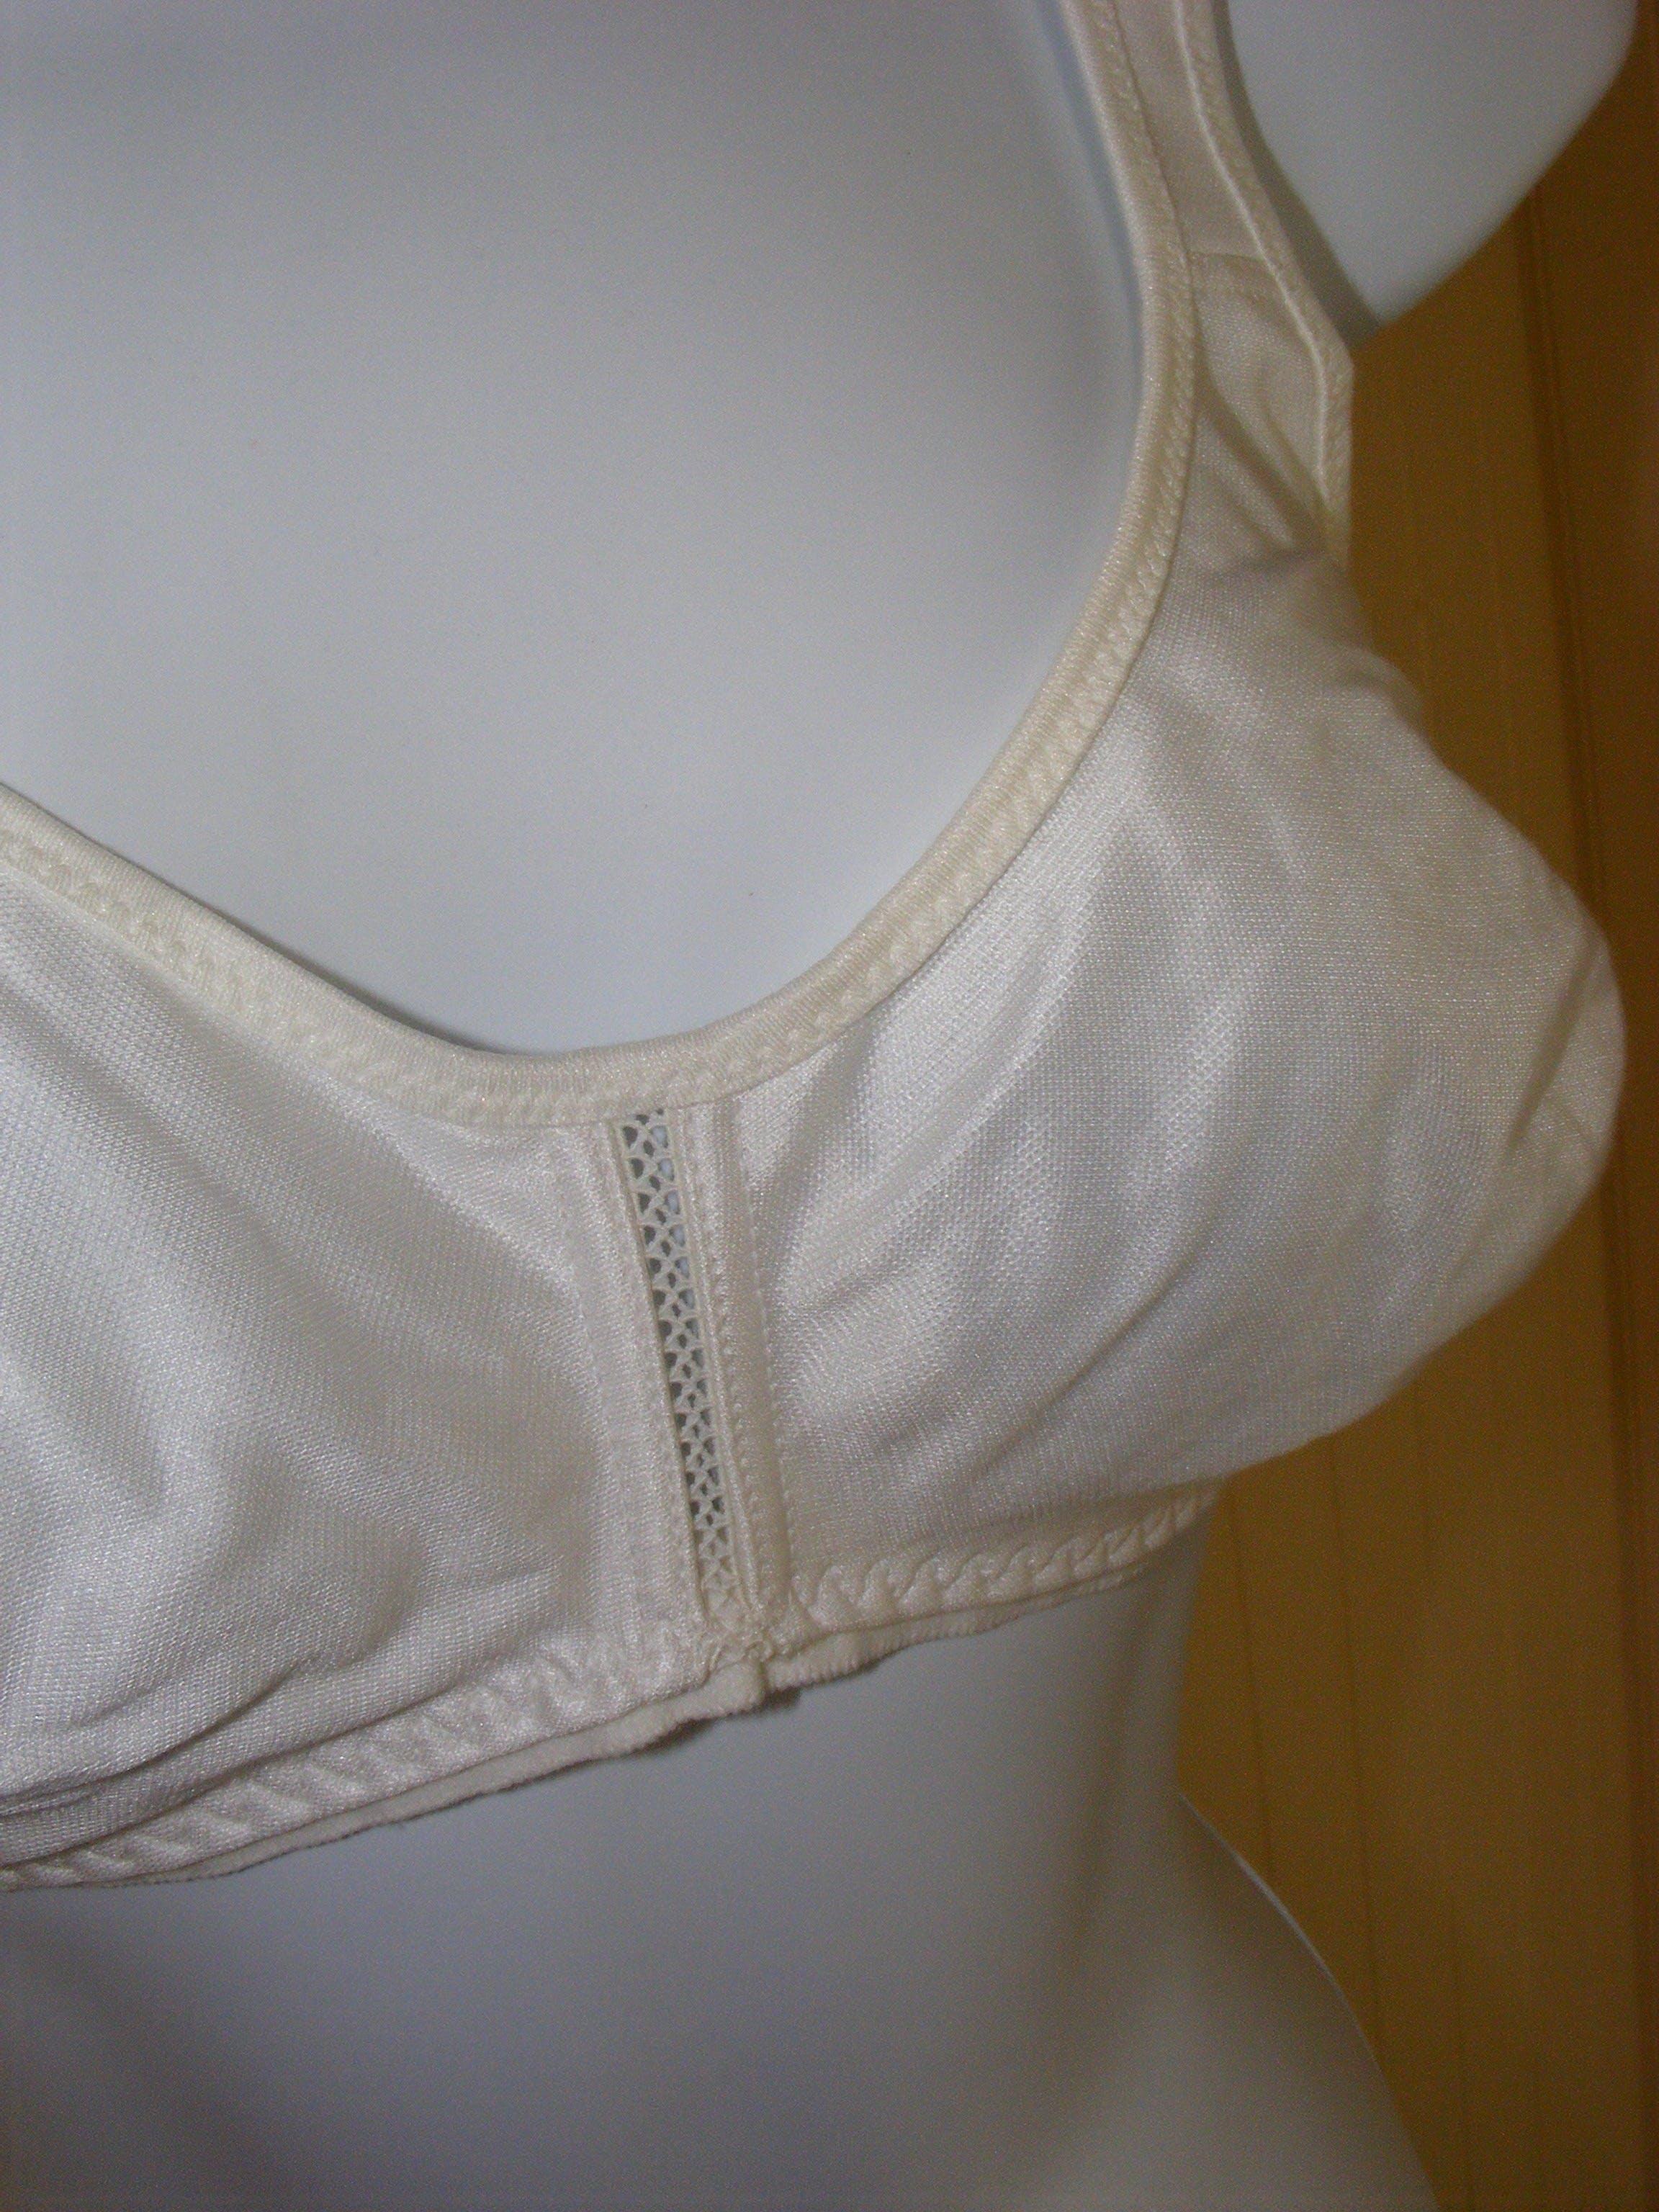 Vintage 80s Bra 38a White Soft Cup Deadstock By Sears | Shop THRILLING